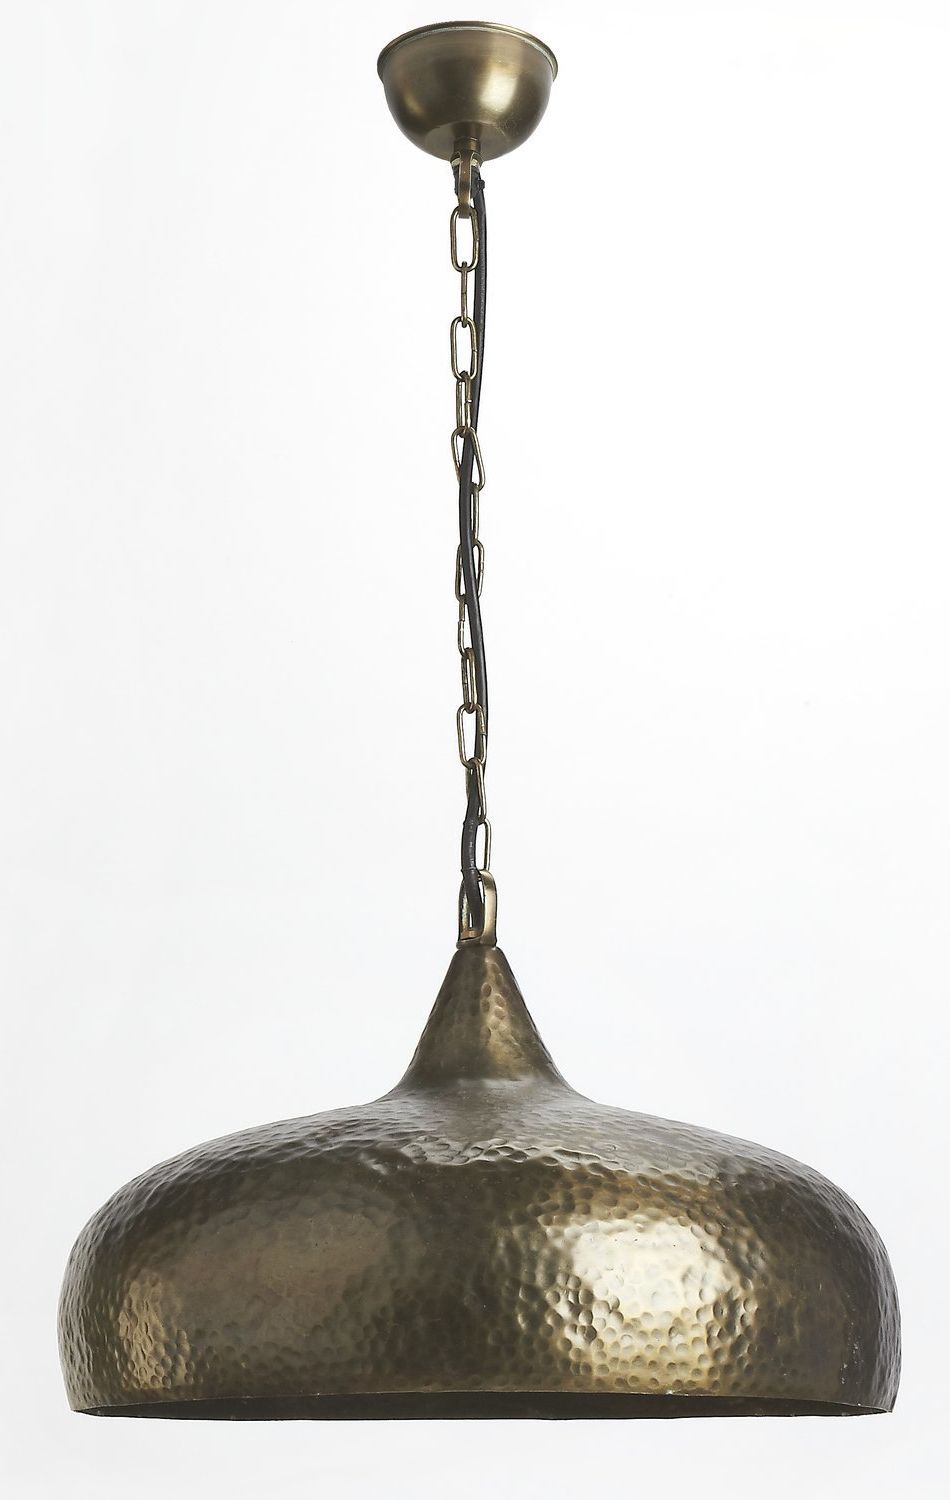 Hammered Antique Gold Brass Finish Pendant Light Free Throughout Most Popular Antique Gold Pendant Lights (View 9 of 15)